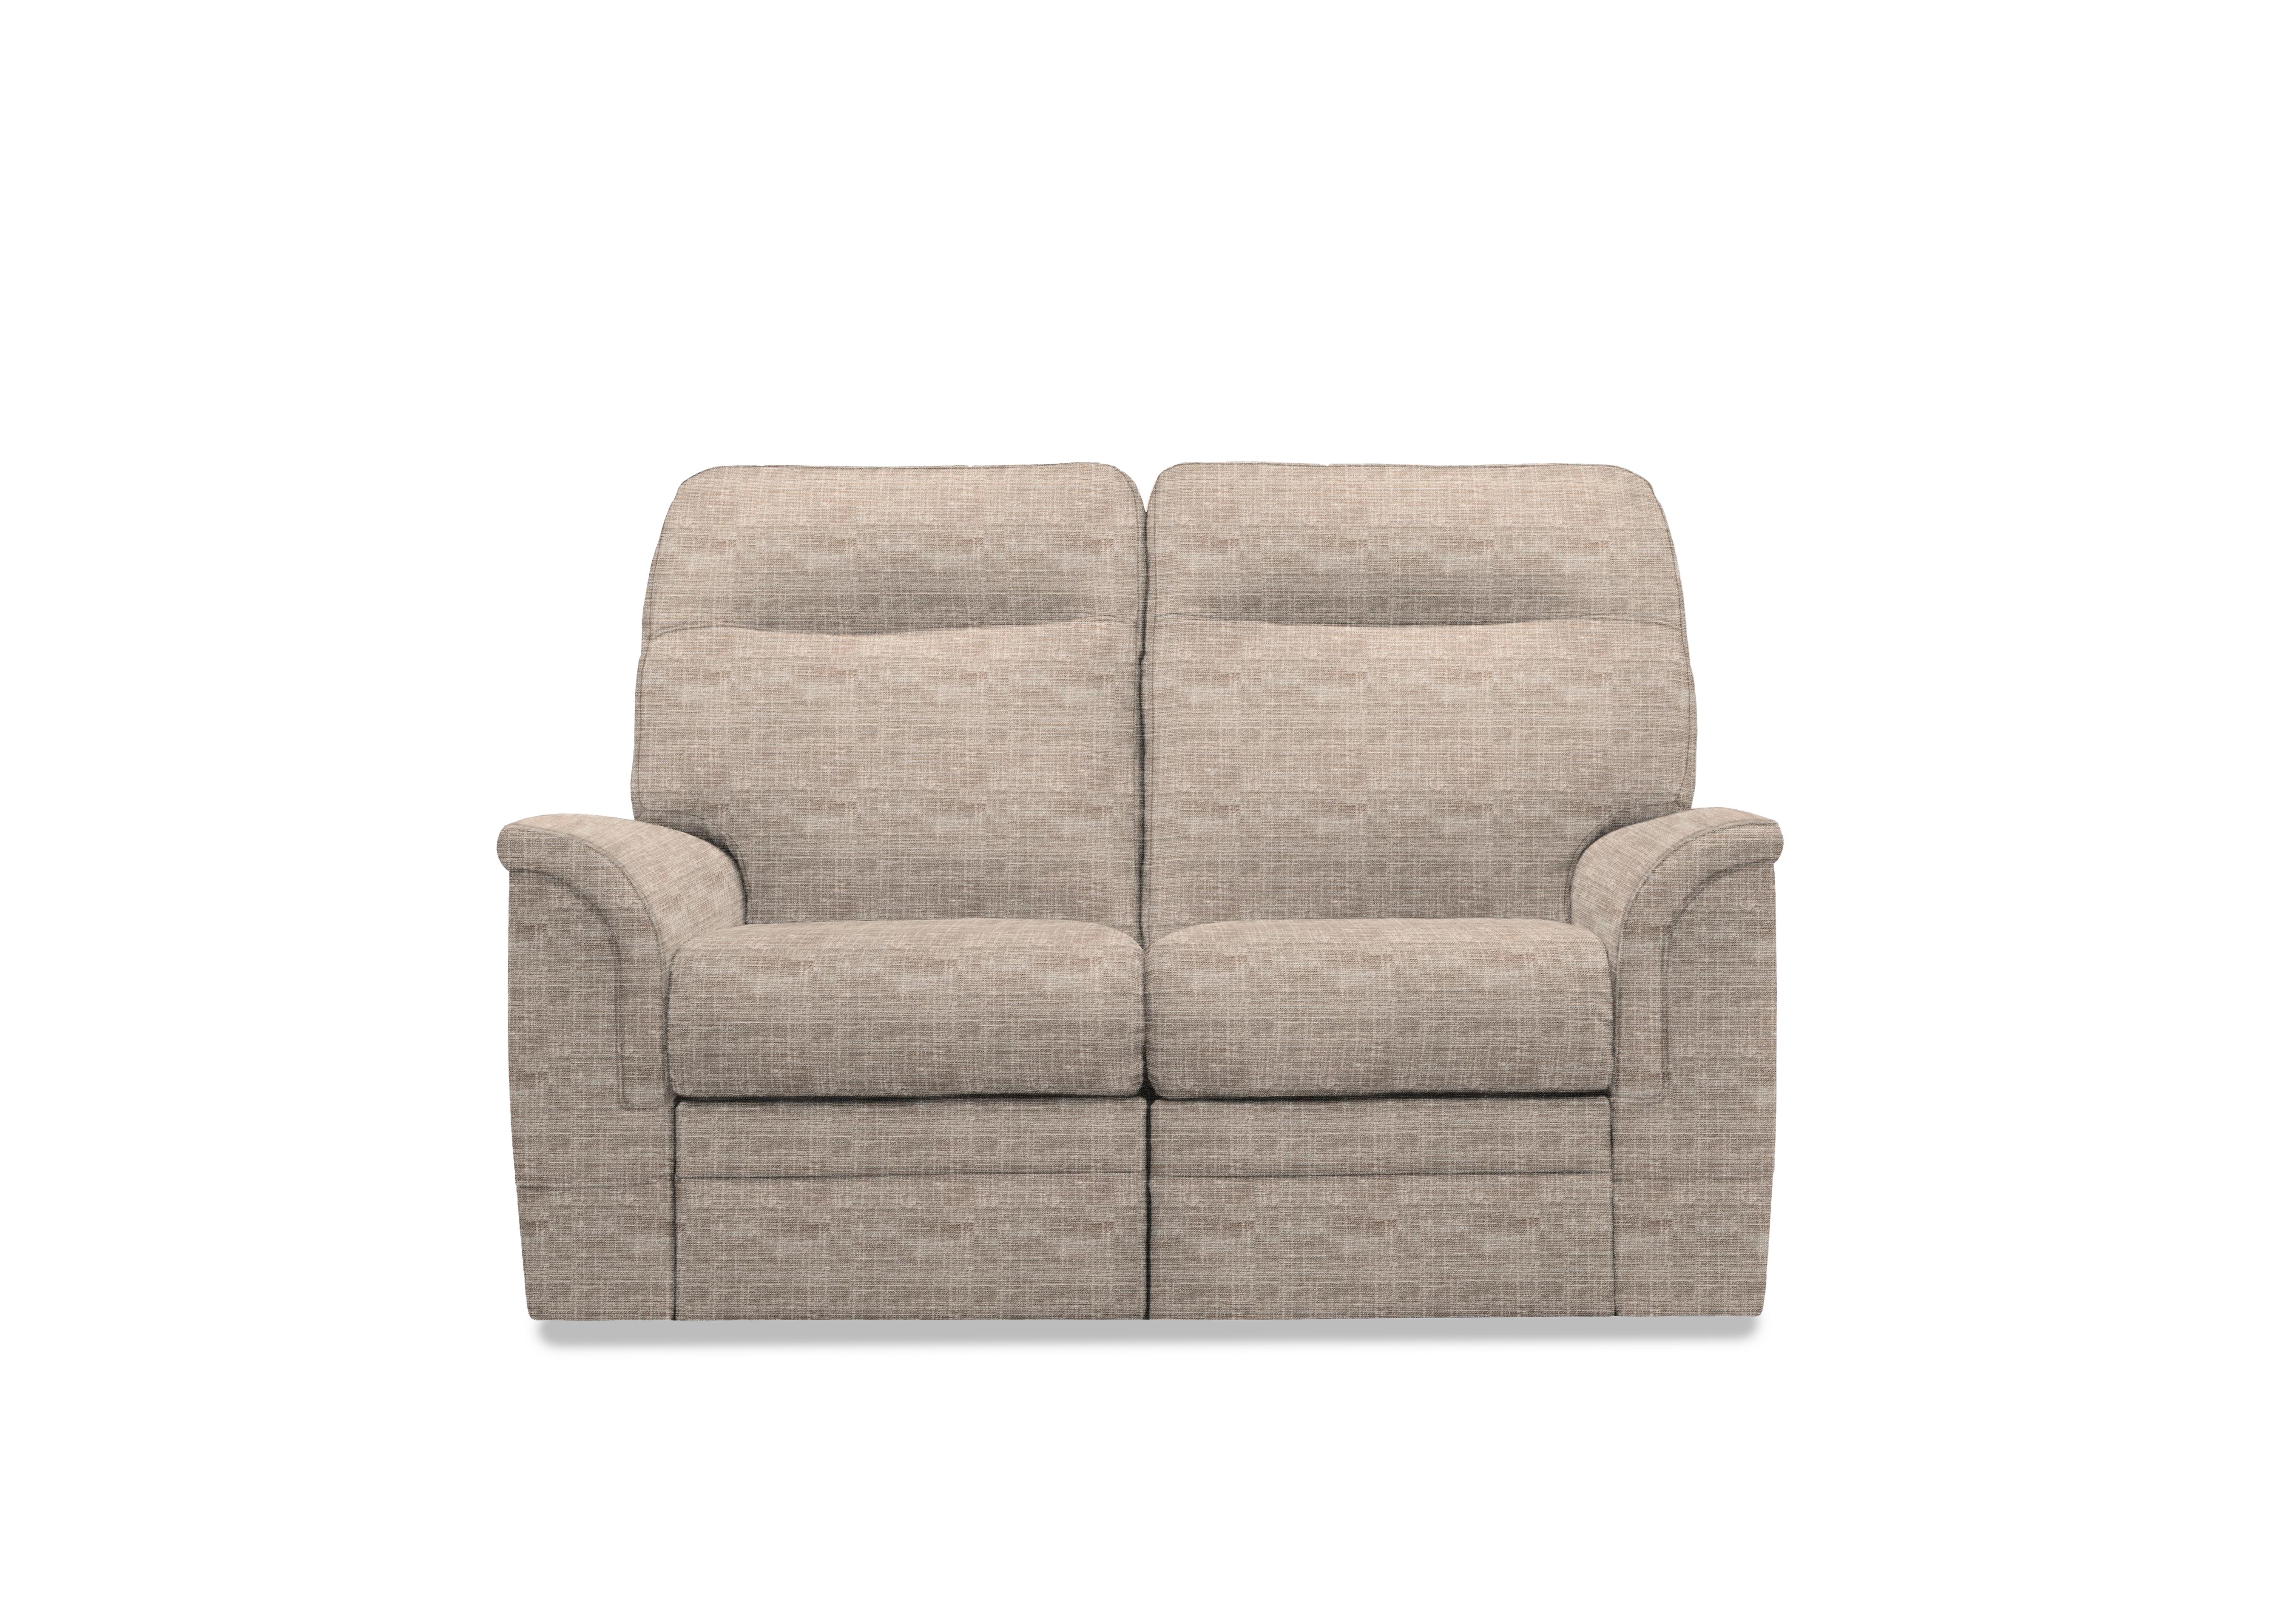 Hudson 23 Fabric 2 Seater Power Recliner Sofa with Power Headrests and Power Lumbar in Dash Oatmeal 001497-0051 on Furniture Village